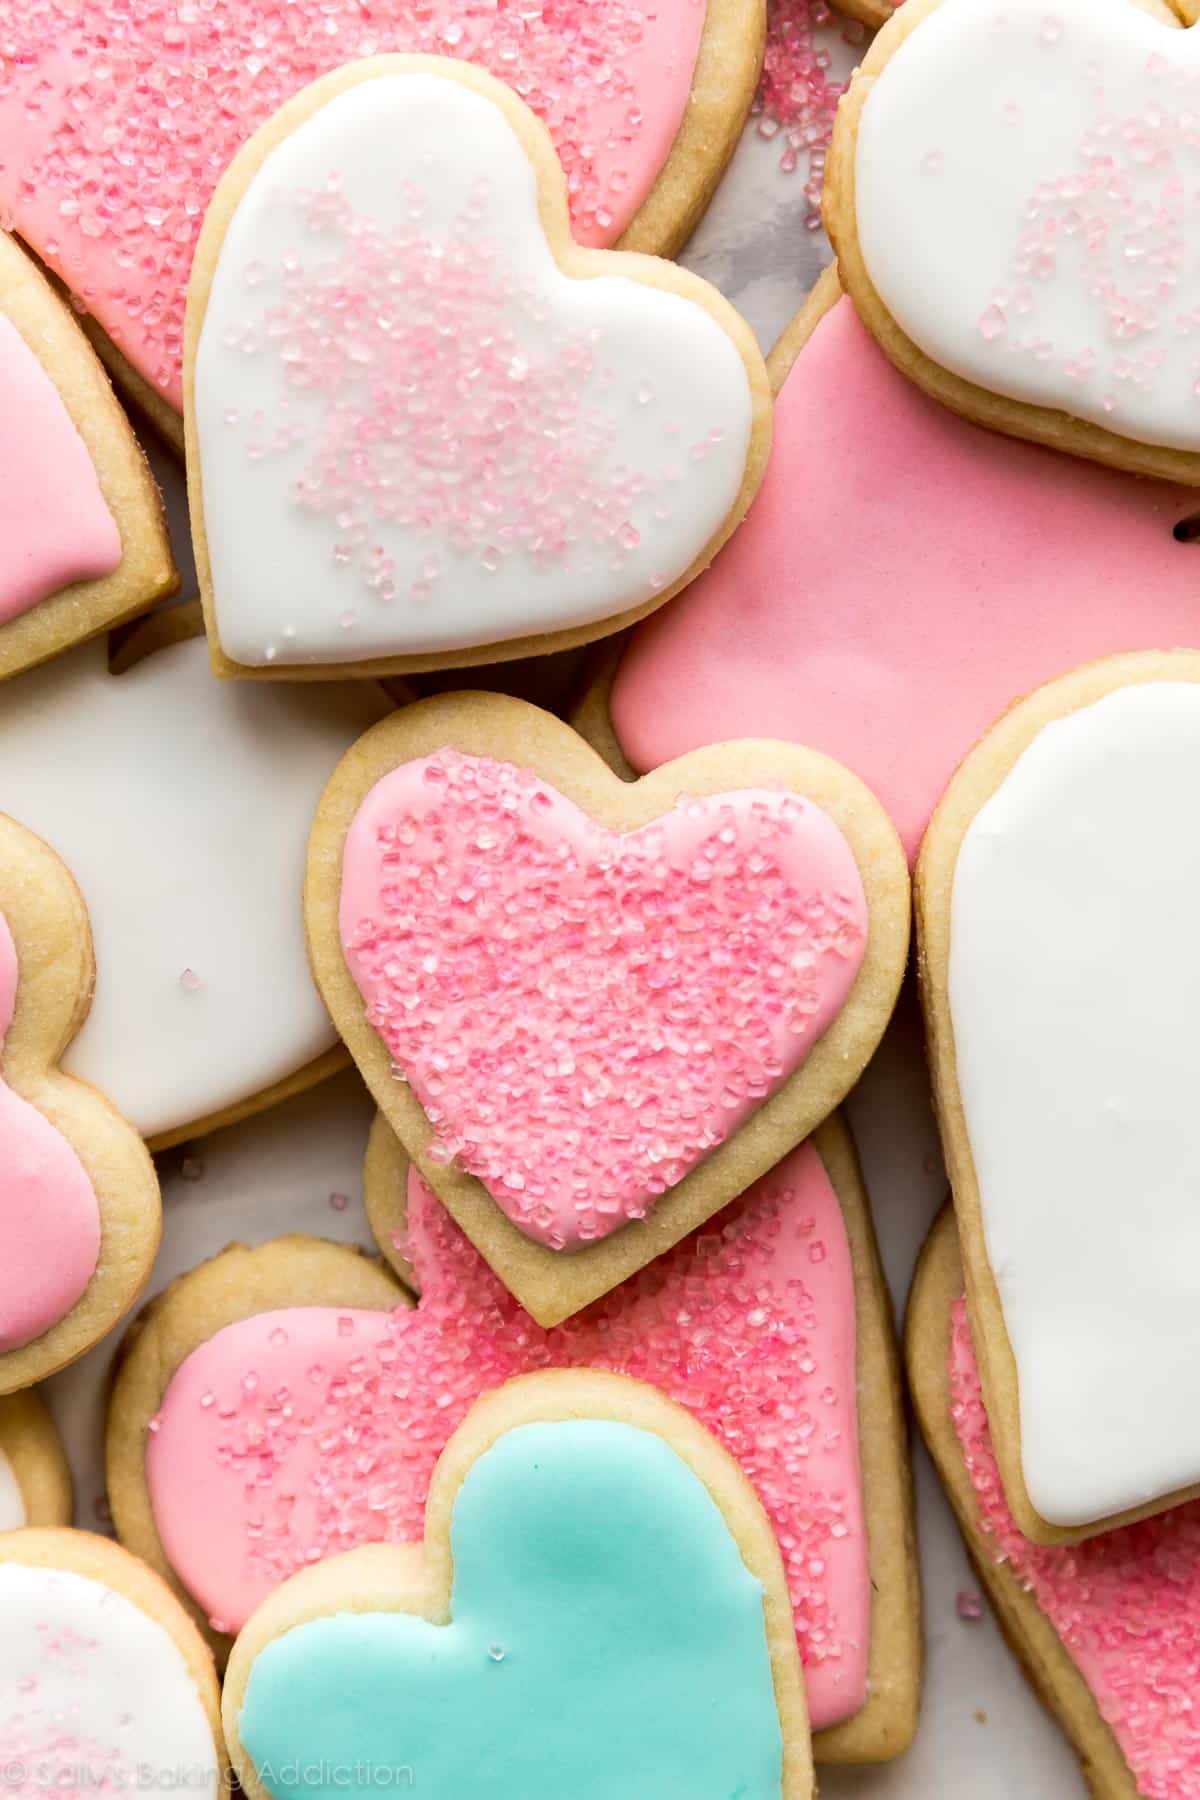 The Best Sugar Cookies (Recipe & Video) - Sally's Baking Addiction